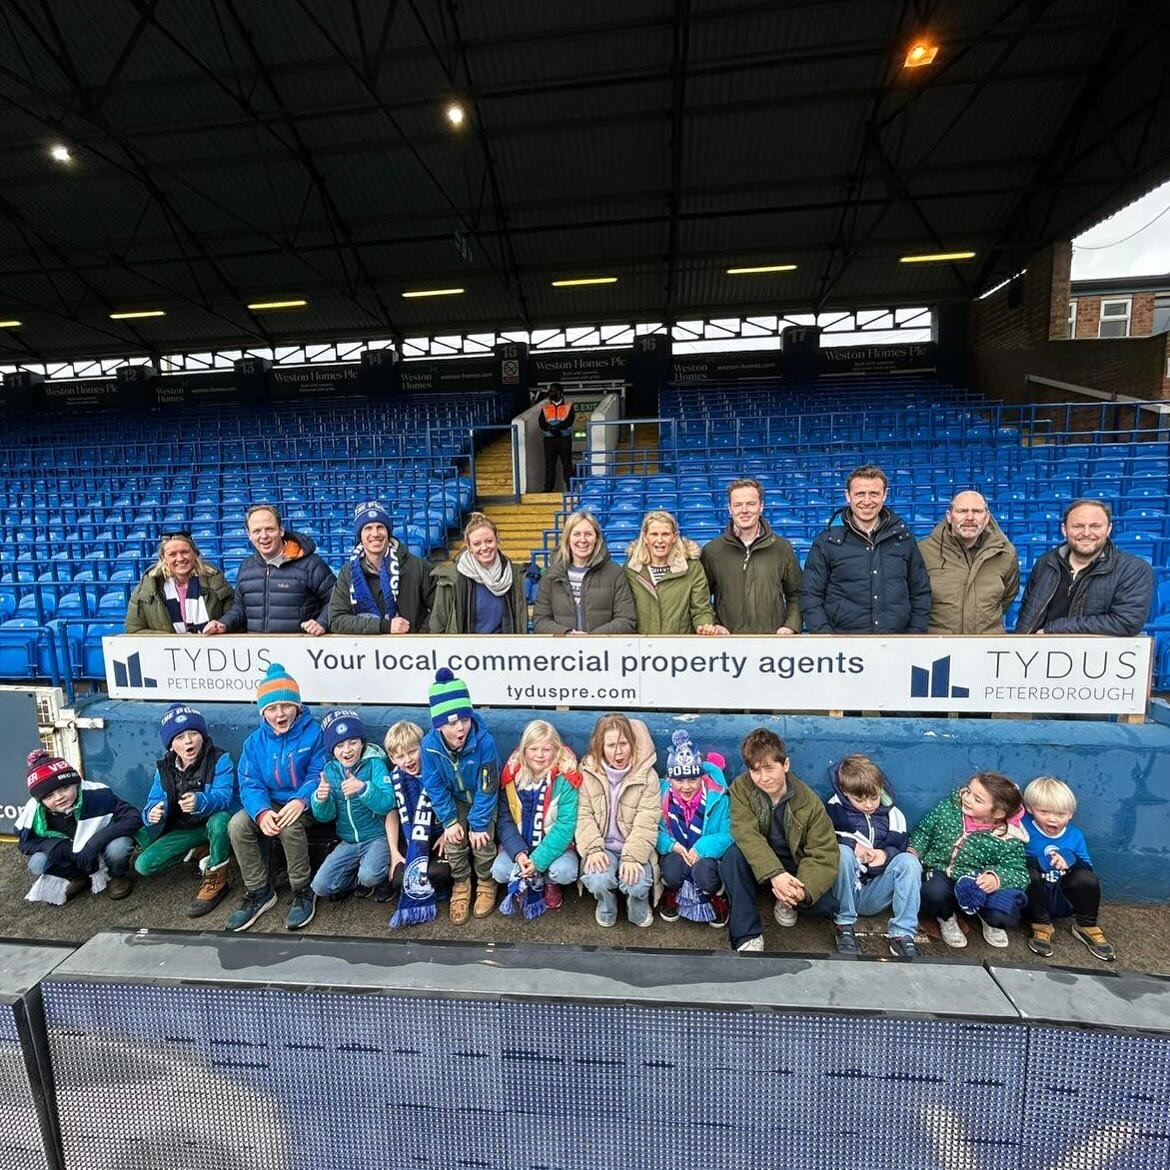 Great turnout to support @theposh V Exeter today! Up the Posh! 💙 @sophiedickens6465 #teamoutting #westonhomes #outinpeterborough #poshmascots